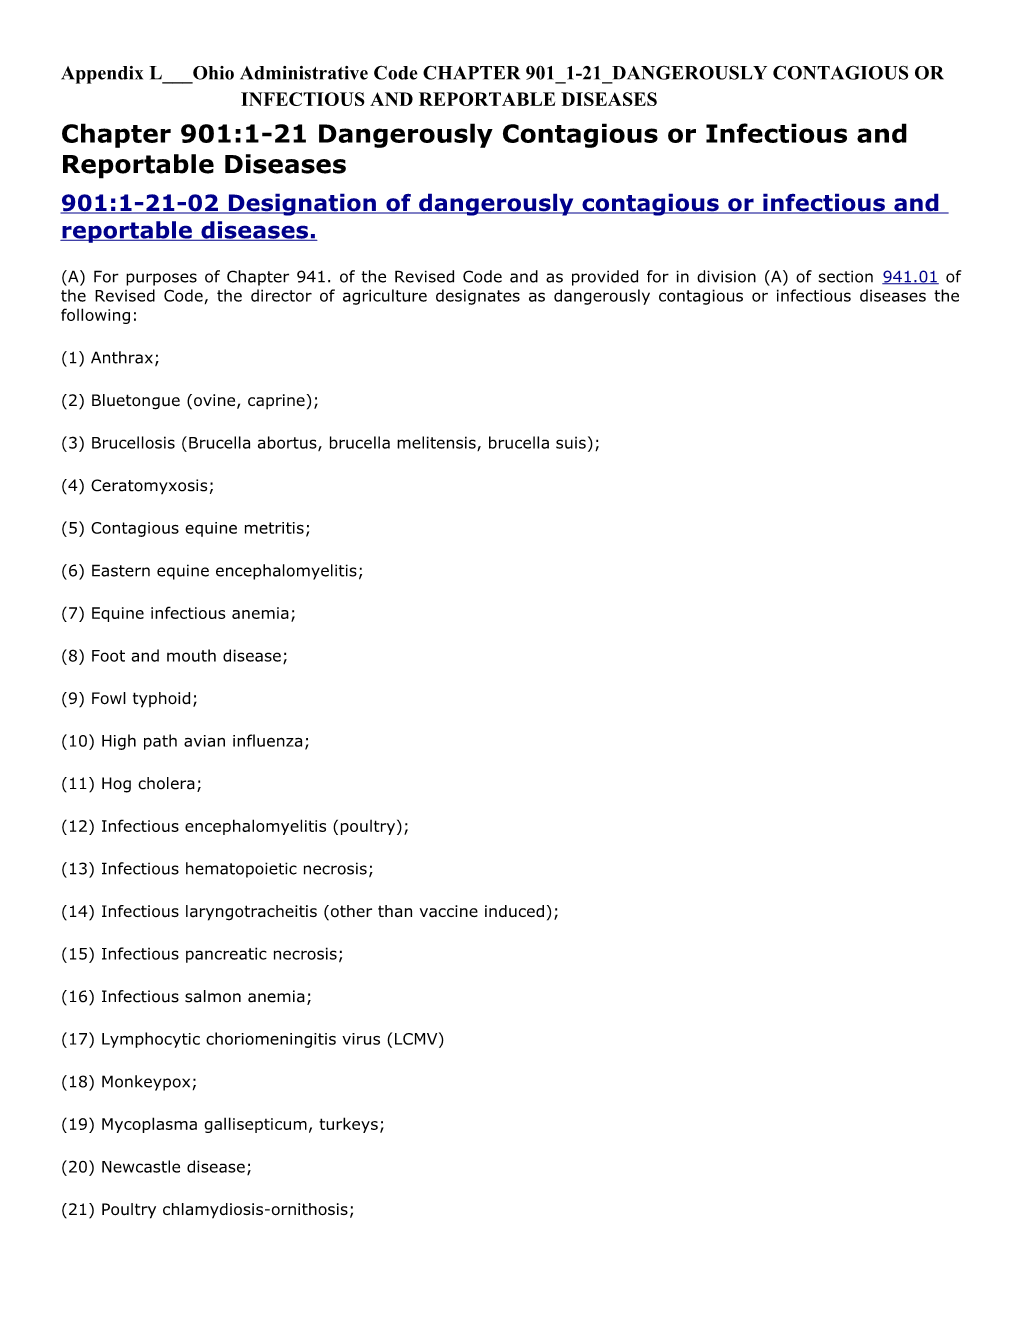 Appendix L___Ohio Administrative Code CHAPTER 901 1-21 DANGEROUSLY CONTAGIOUS OR INFECTIOUS